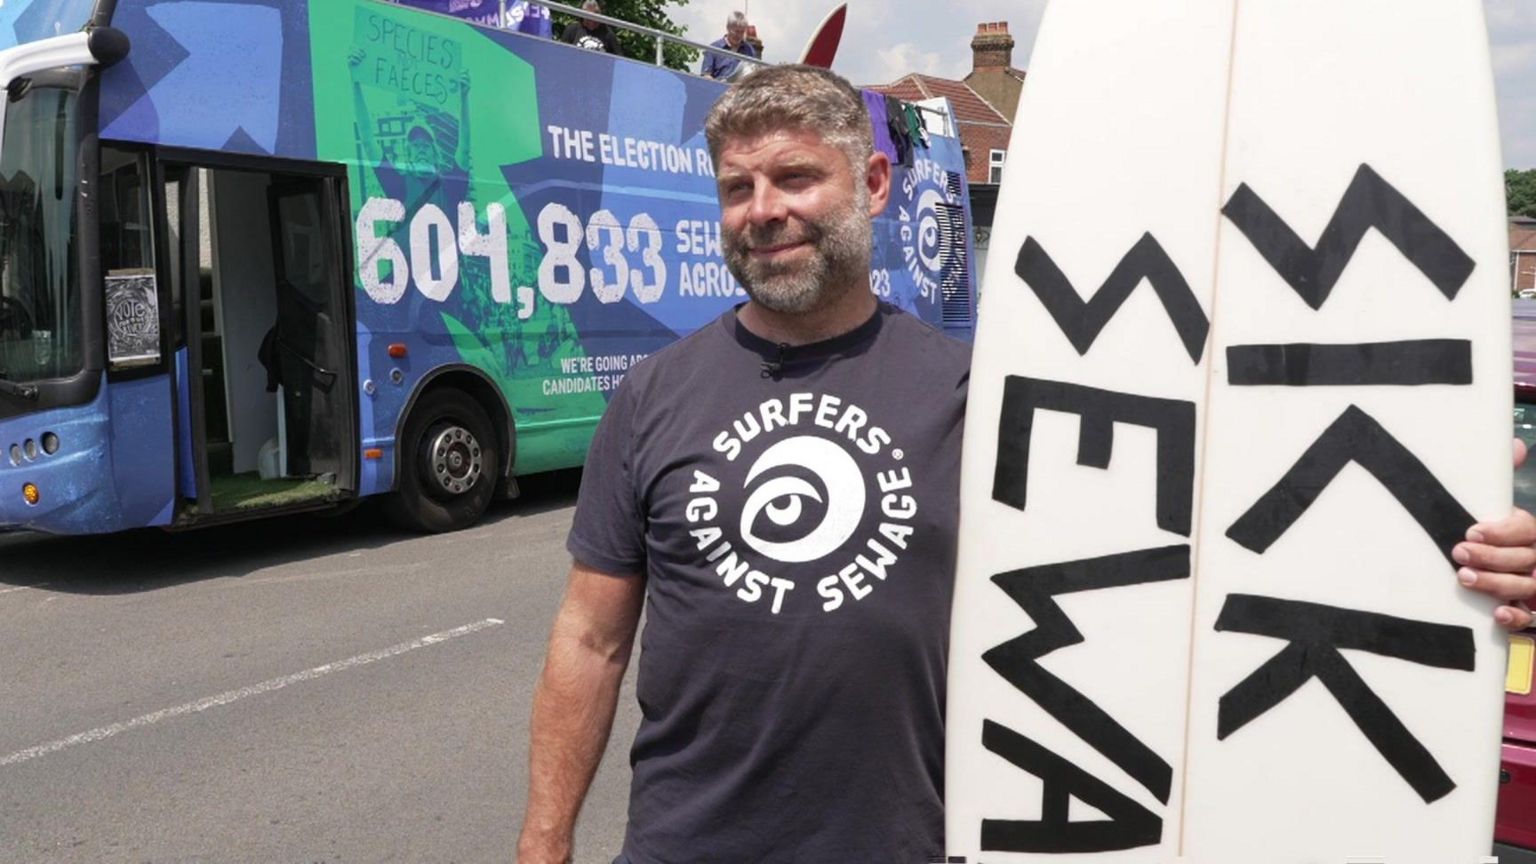 Giles Bristow was at the protest for Surfers Against Sewage stood with a surfboard and in front of a blue coloured bus with facts and figures on the side